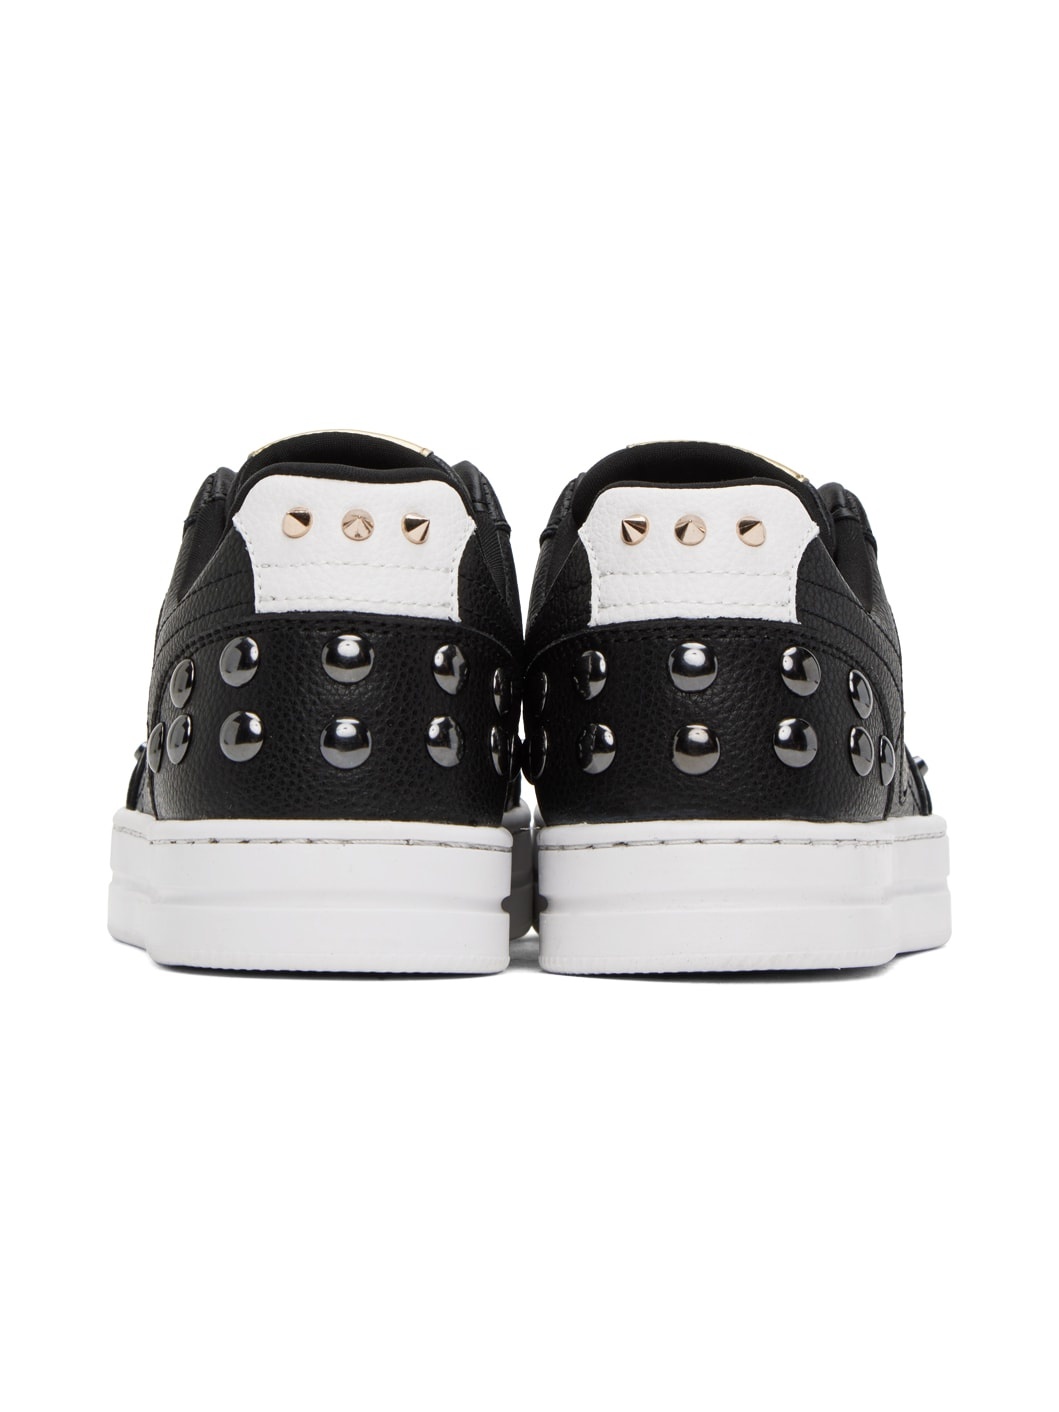 Black Court 88 Spiked Sneakers - 2